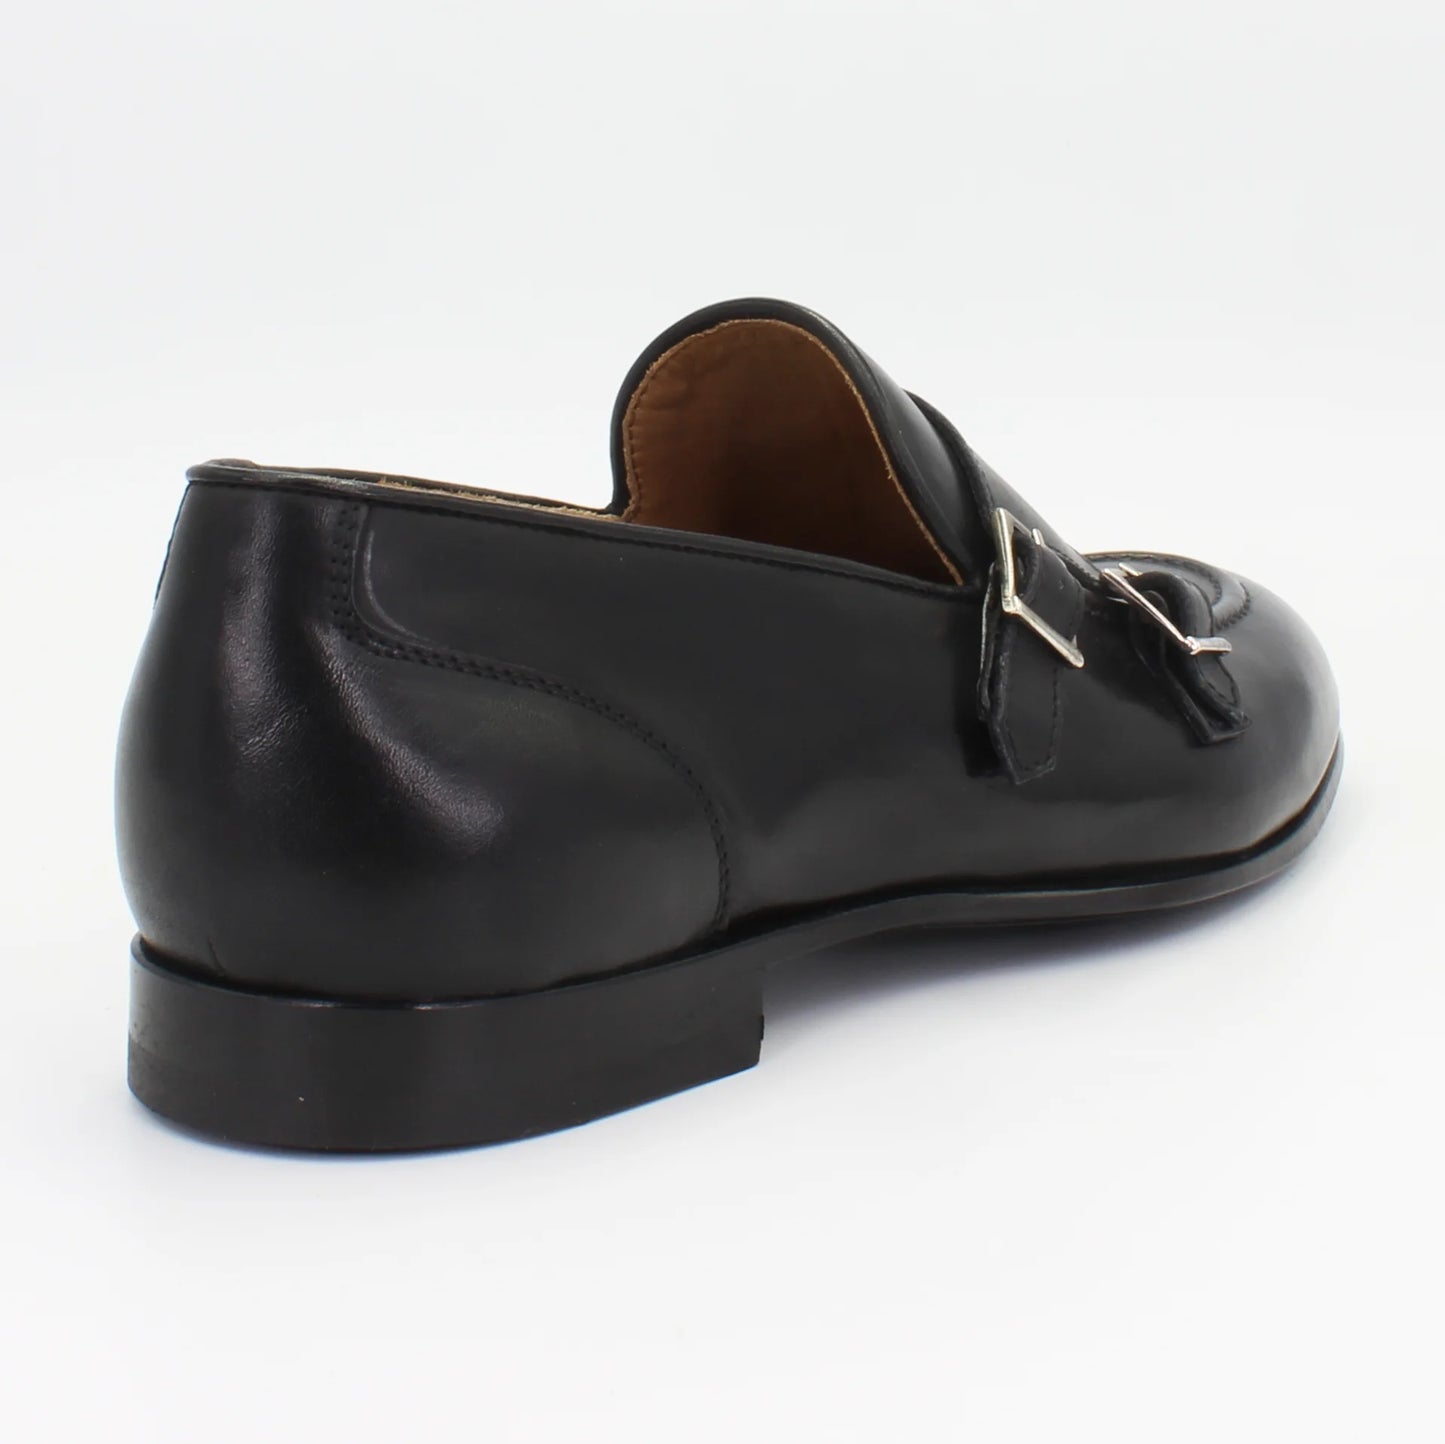 Shop Handmade Italian Leather Monk Strap in Nero (BRU10548) or browse our range of hand-made Italian shoes for men in leather or suede in-store at Aliverti Cape Town, or shop online. We deliver in South Africa & offer multiple payment plans as well as accept multiple safe & secure payment methods.